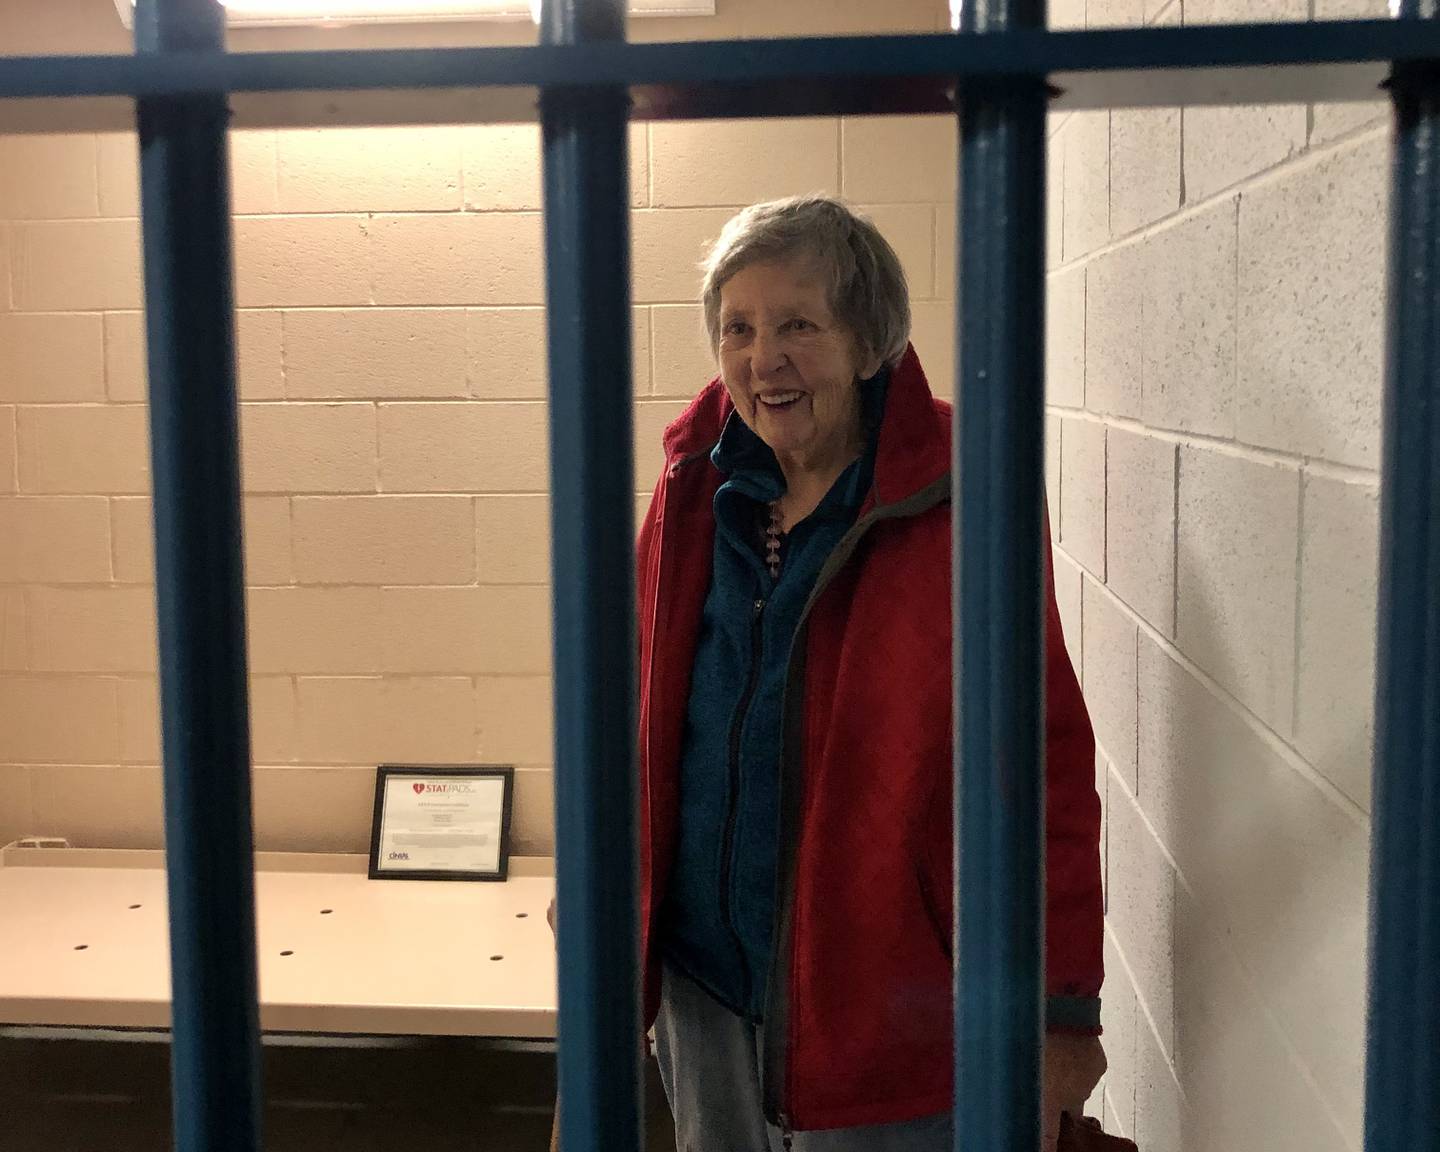 The OSCC chose to leave a holding cell from the old police station intact in the basement of their new home, as a photo opportunity for visitors.  Connie Hilchen, OSCC participant, pictured here.